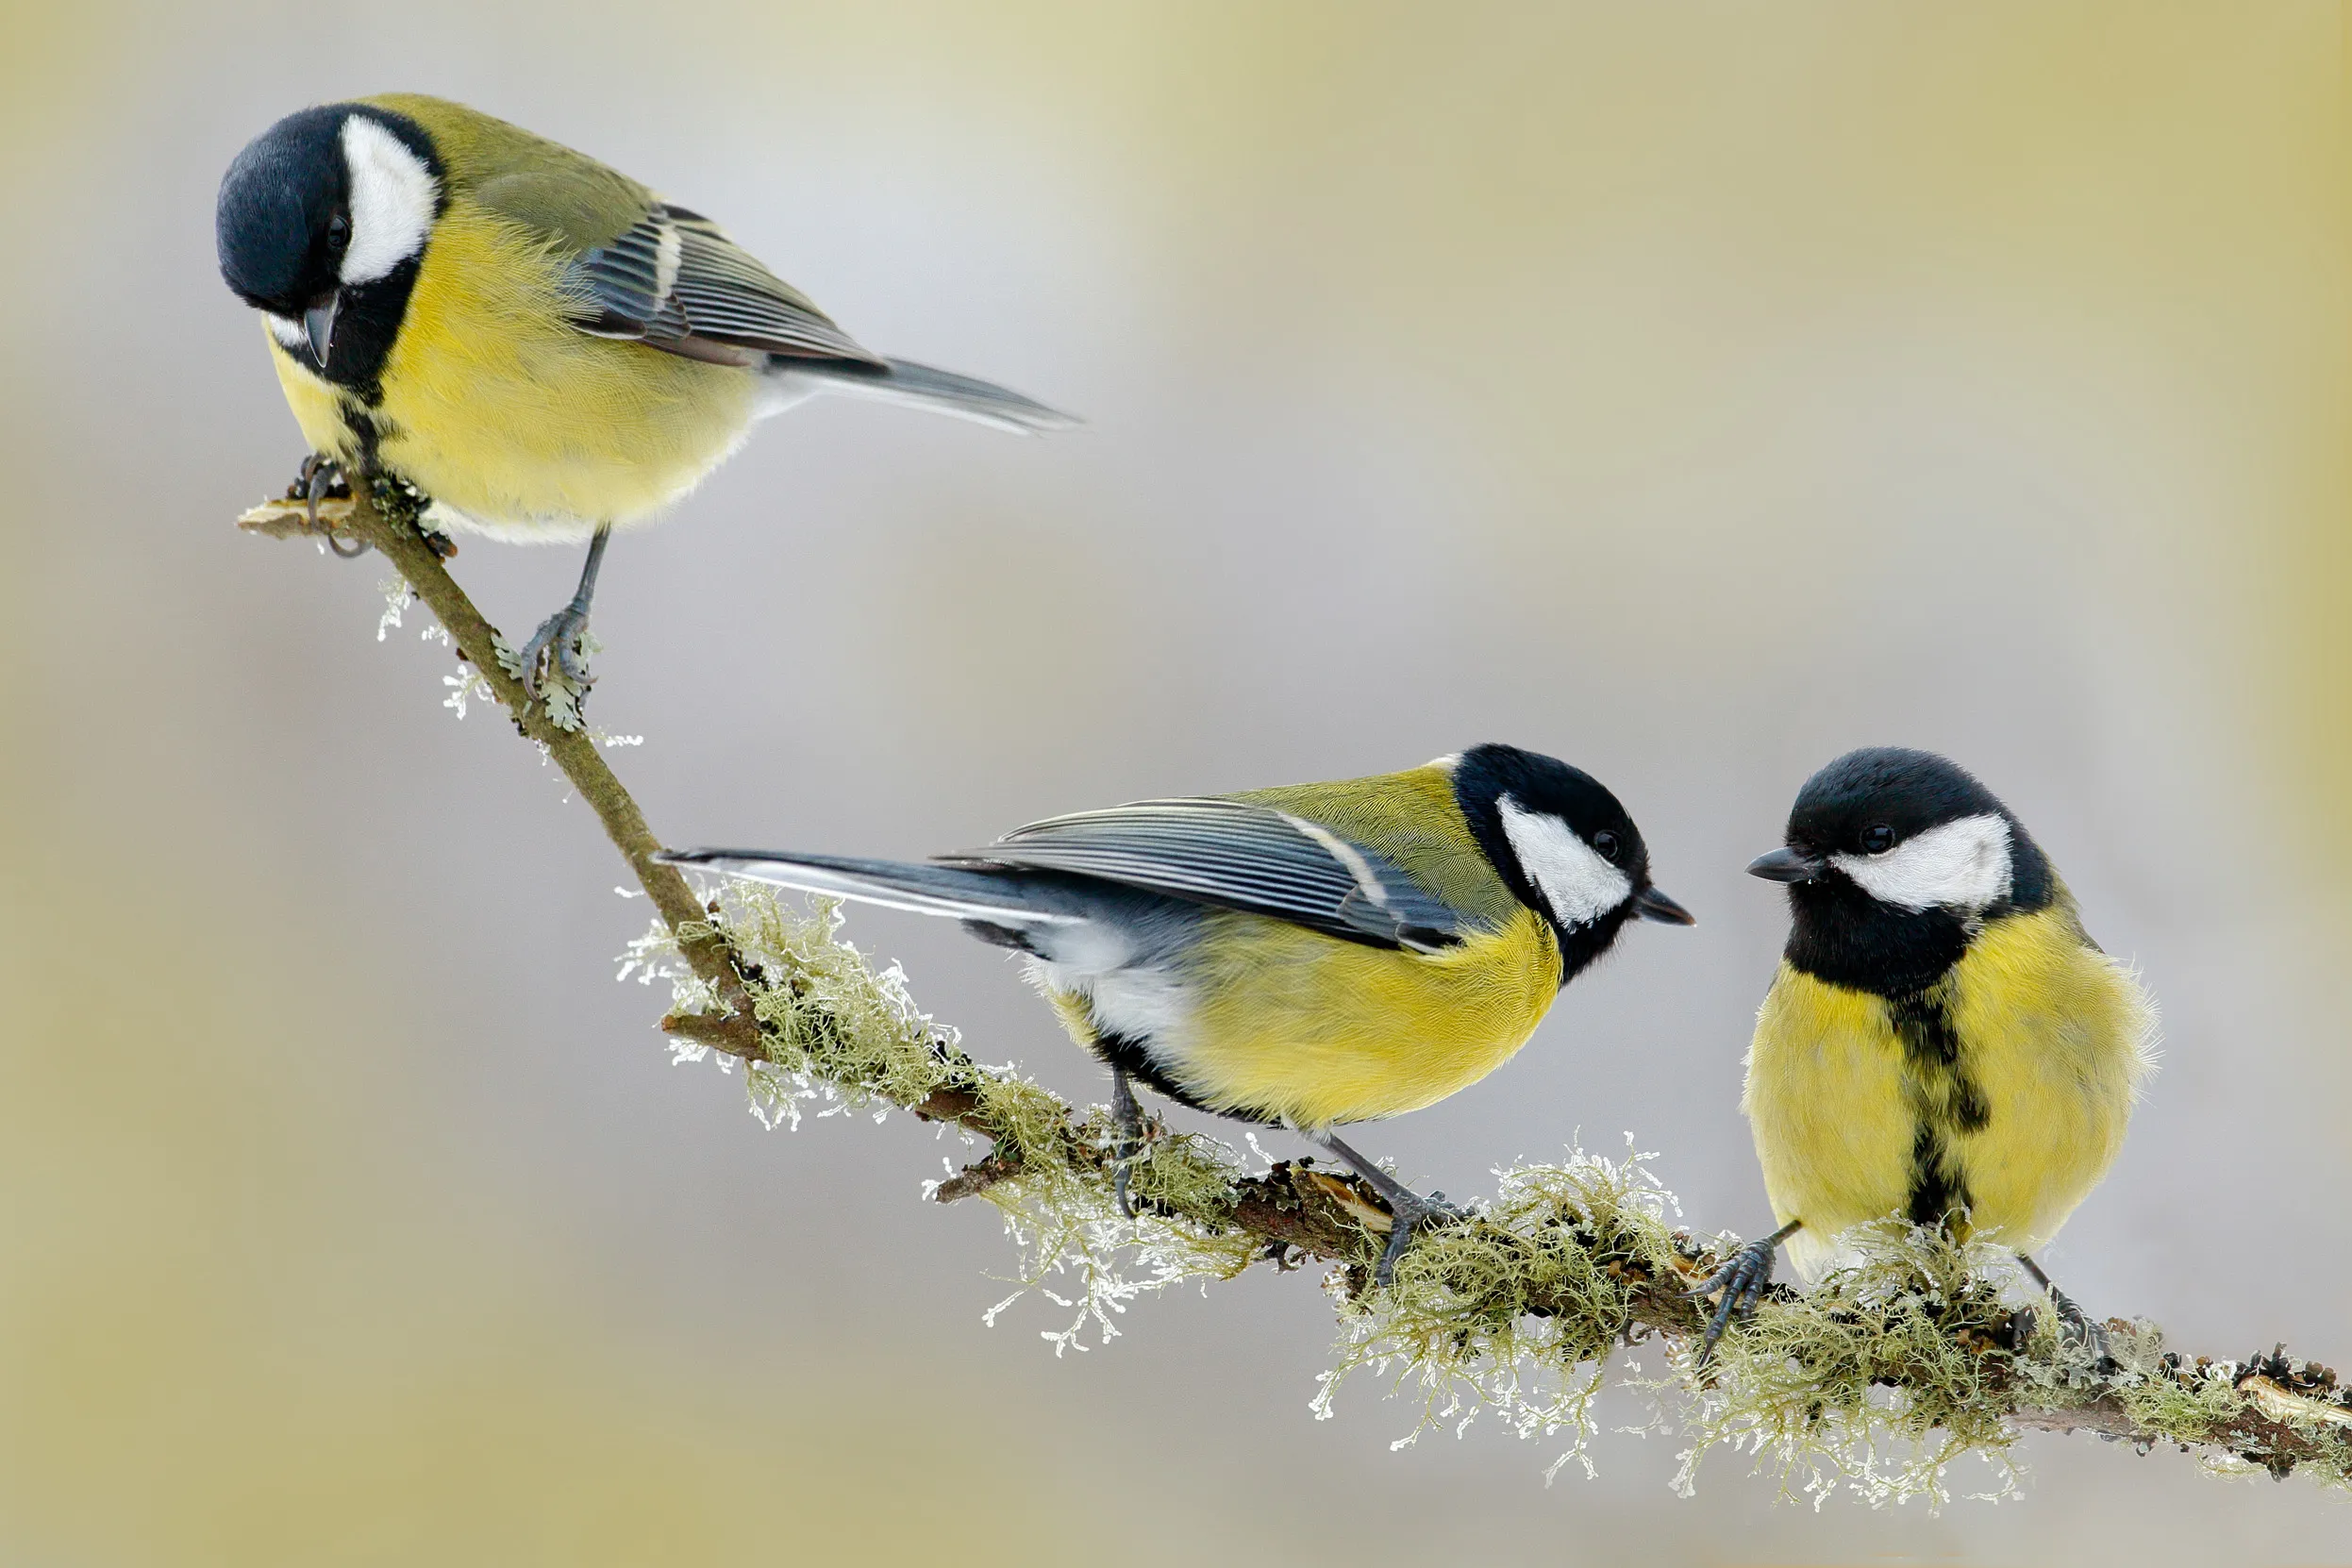 A group of three Great Tits perched on a lichen covered branch.